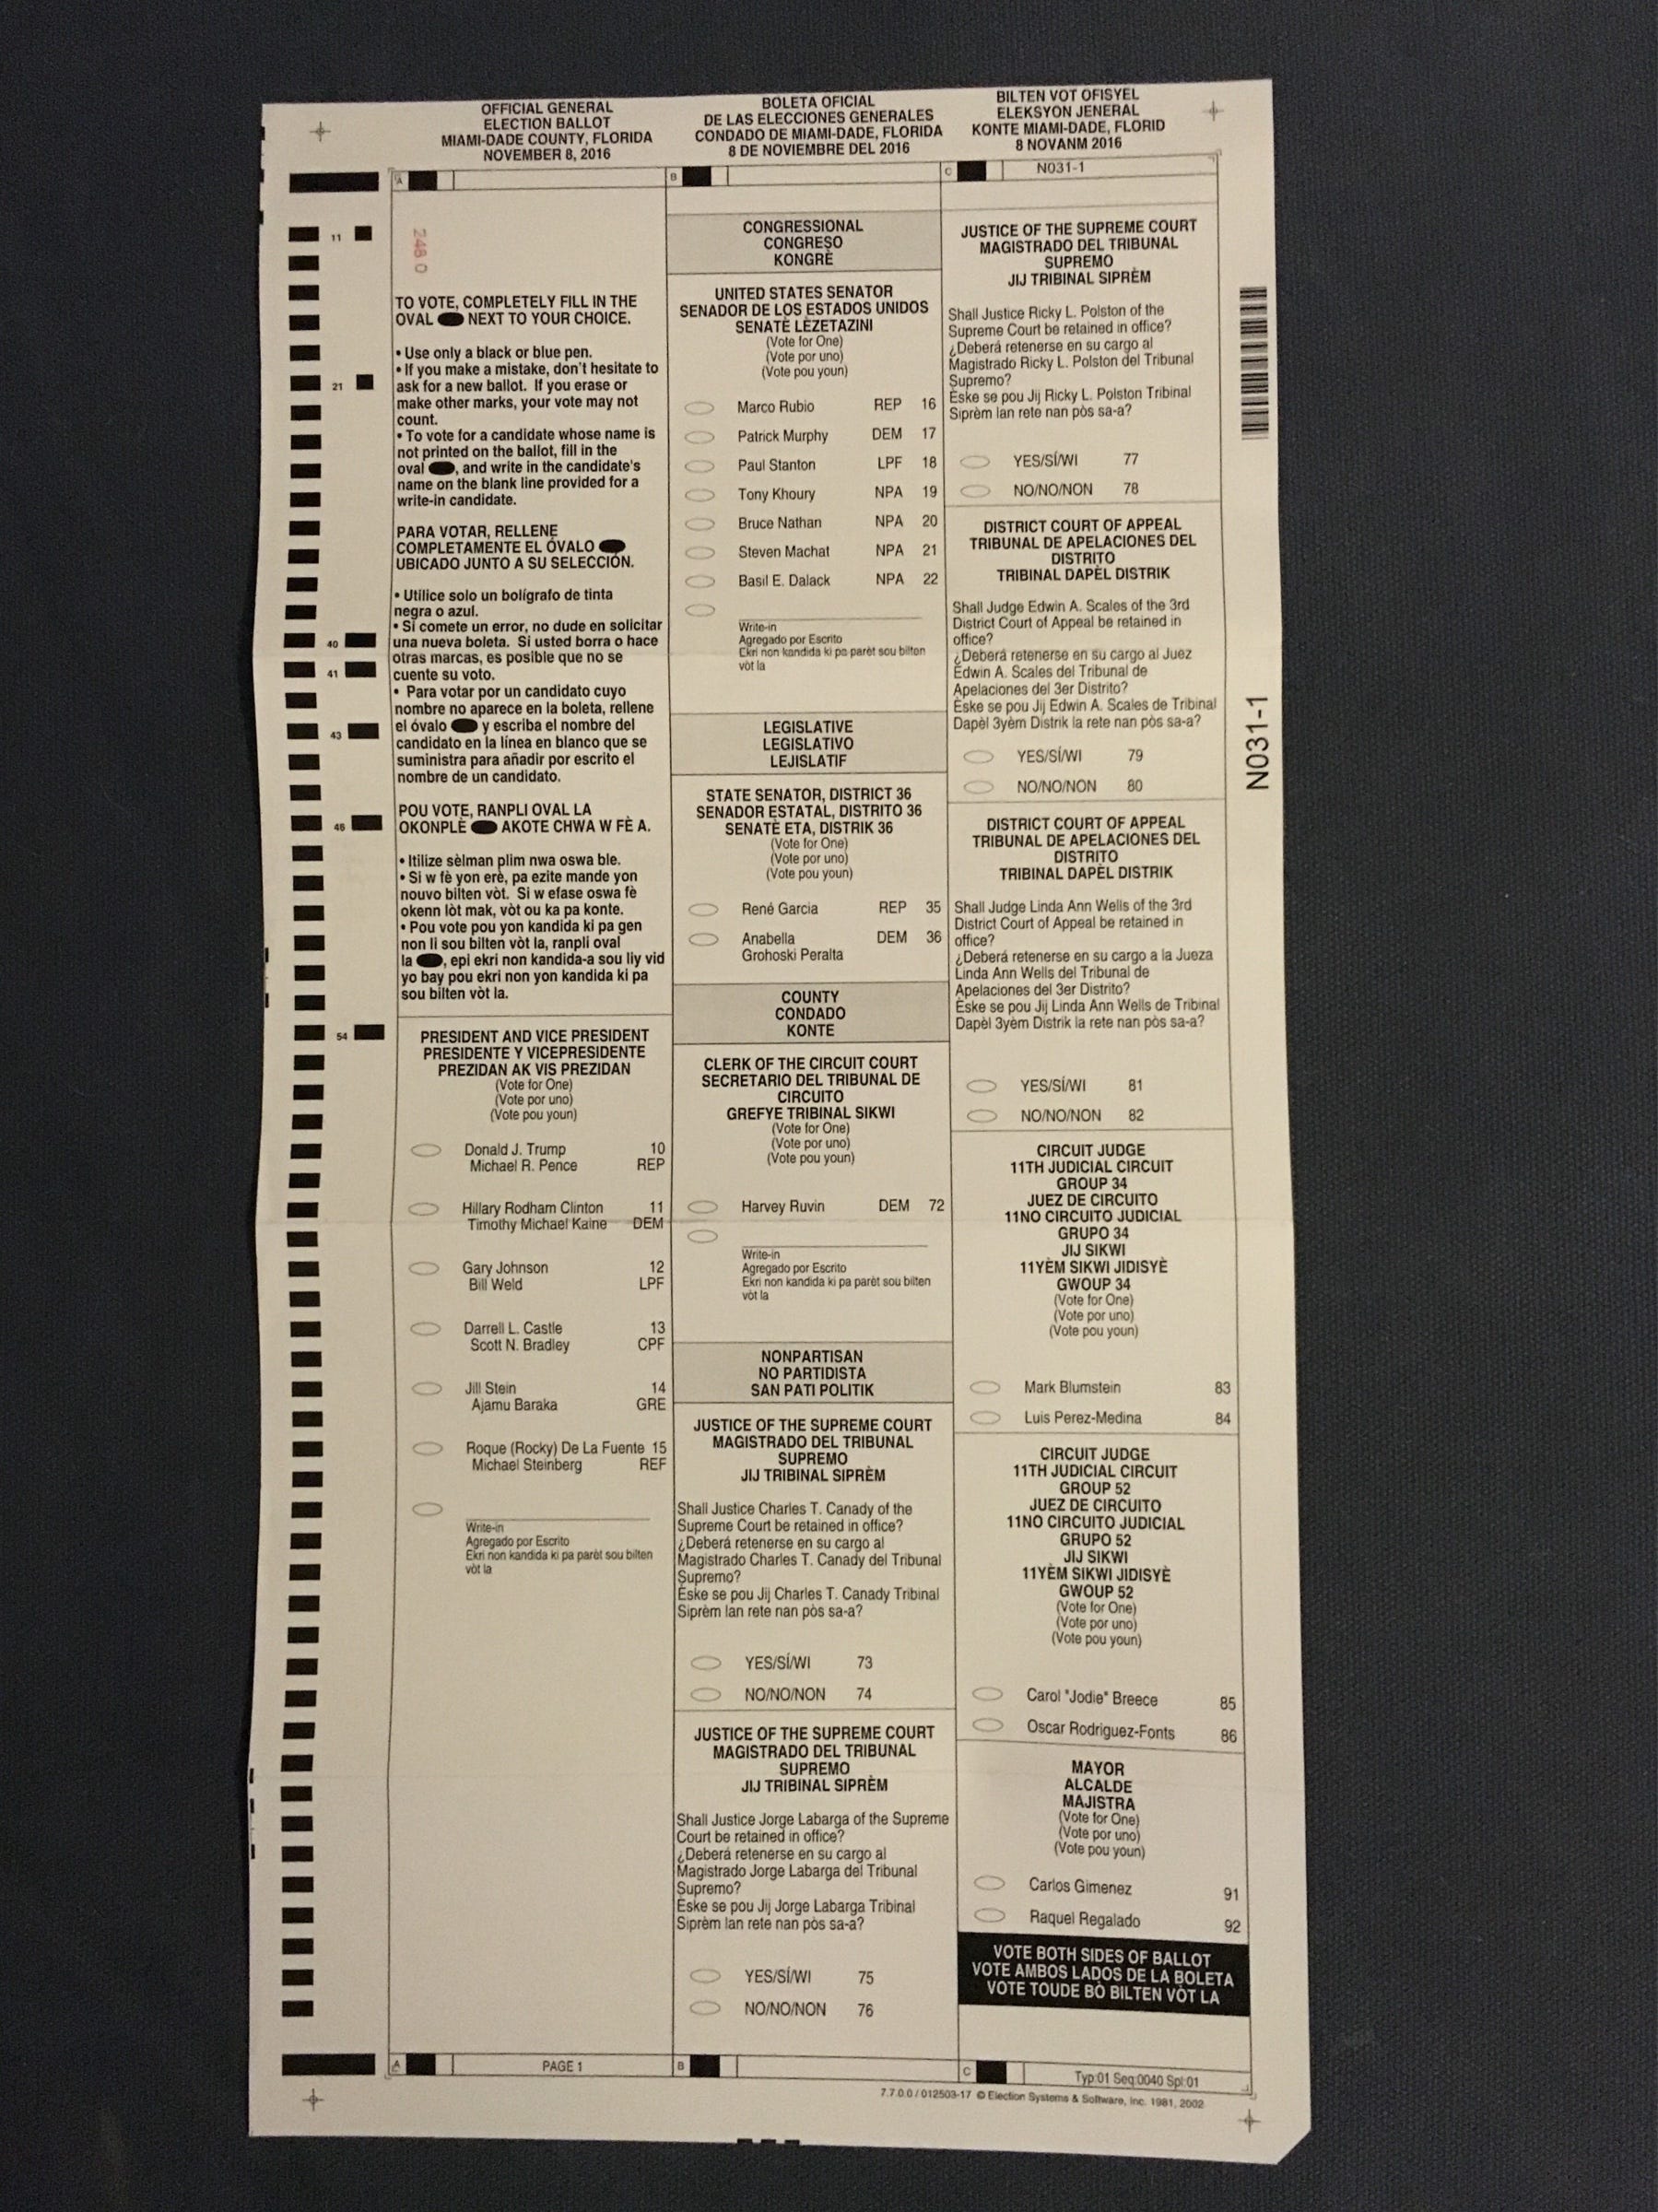 The Uninformed Voter’s Guide to the MiamiDade County Ballot by